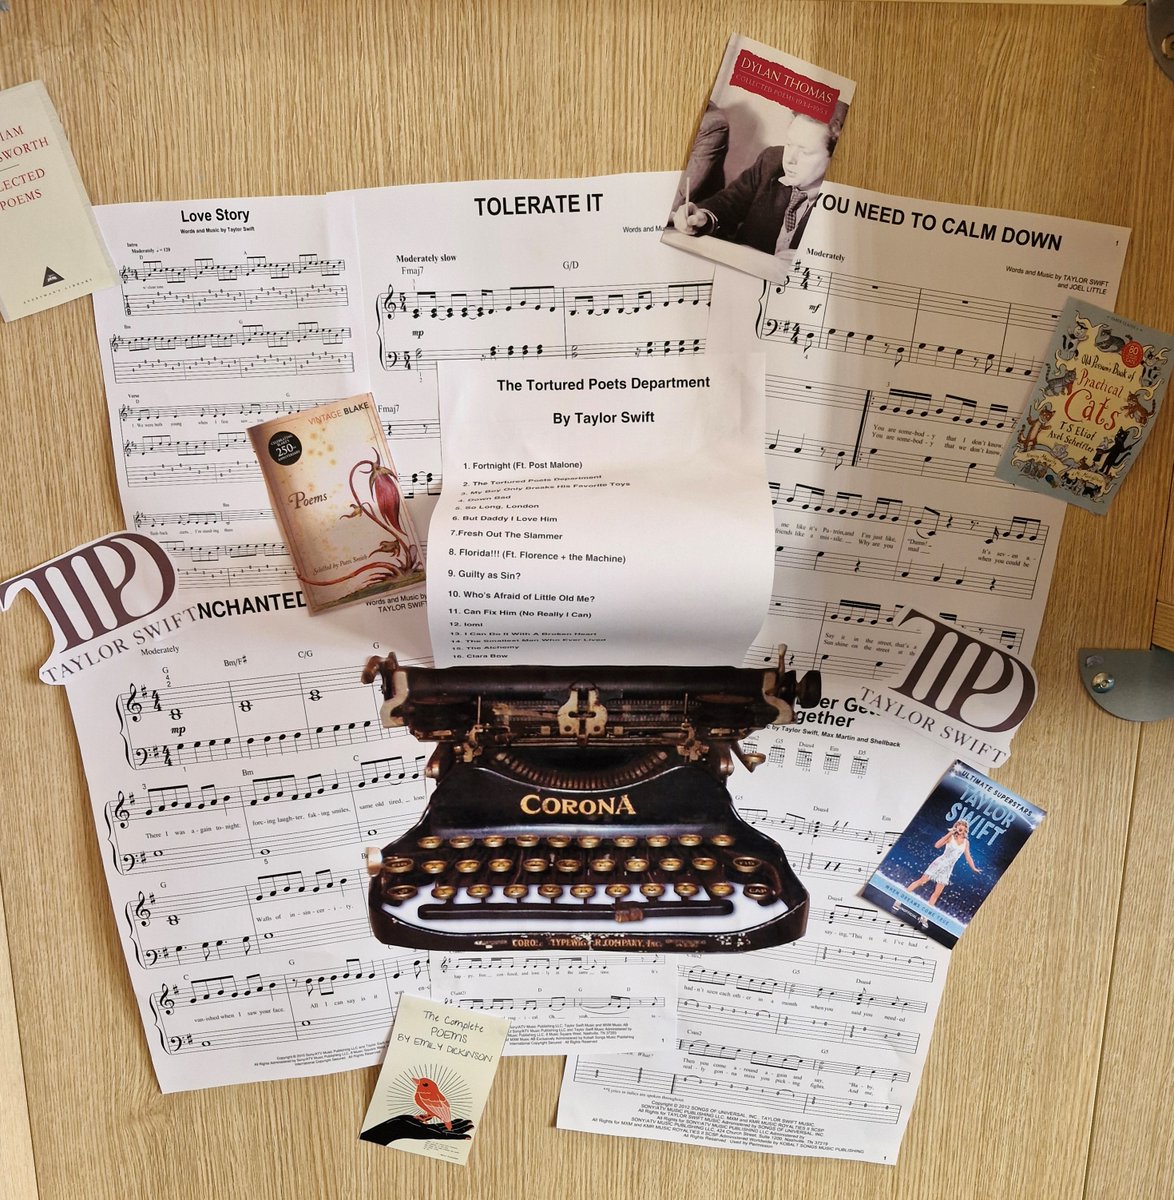 Huge thank you to @ForAcadLib & @MackieLibandLit  for the inspiration for our Taylor Swift - 'The Tortured Poets Department' display... we have lots of lovely poetry books if you feel encouraged to read some✍️🎶
#readingschools #readingforpleasure